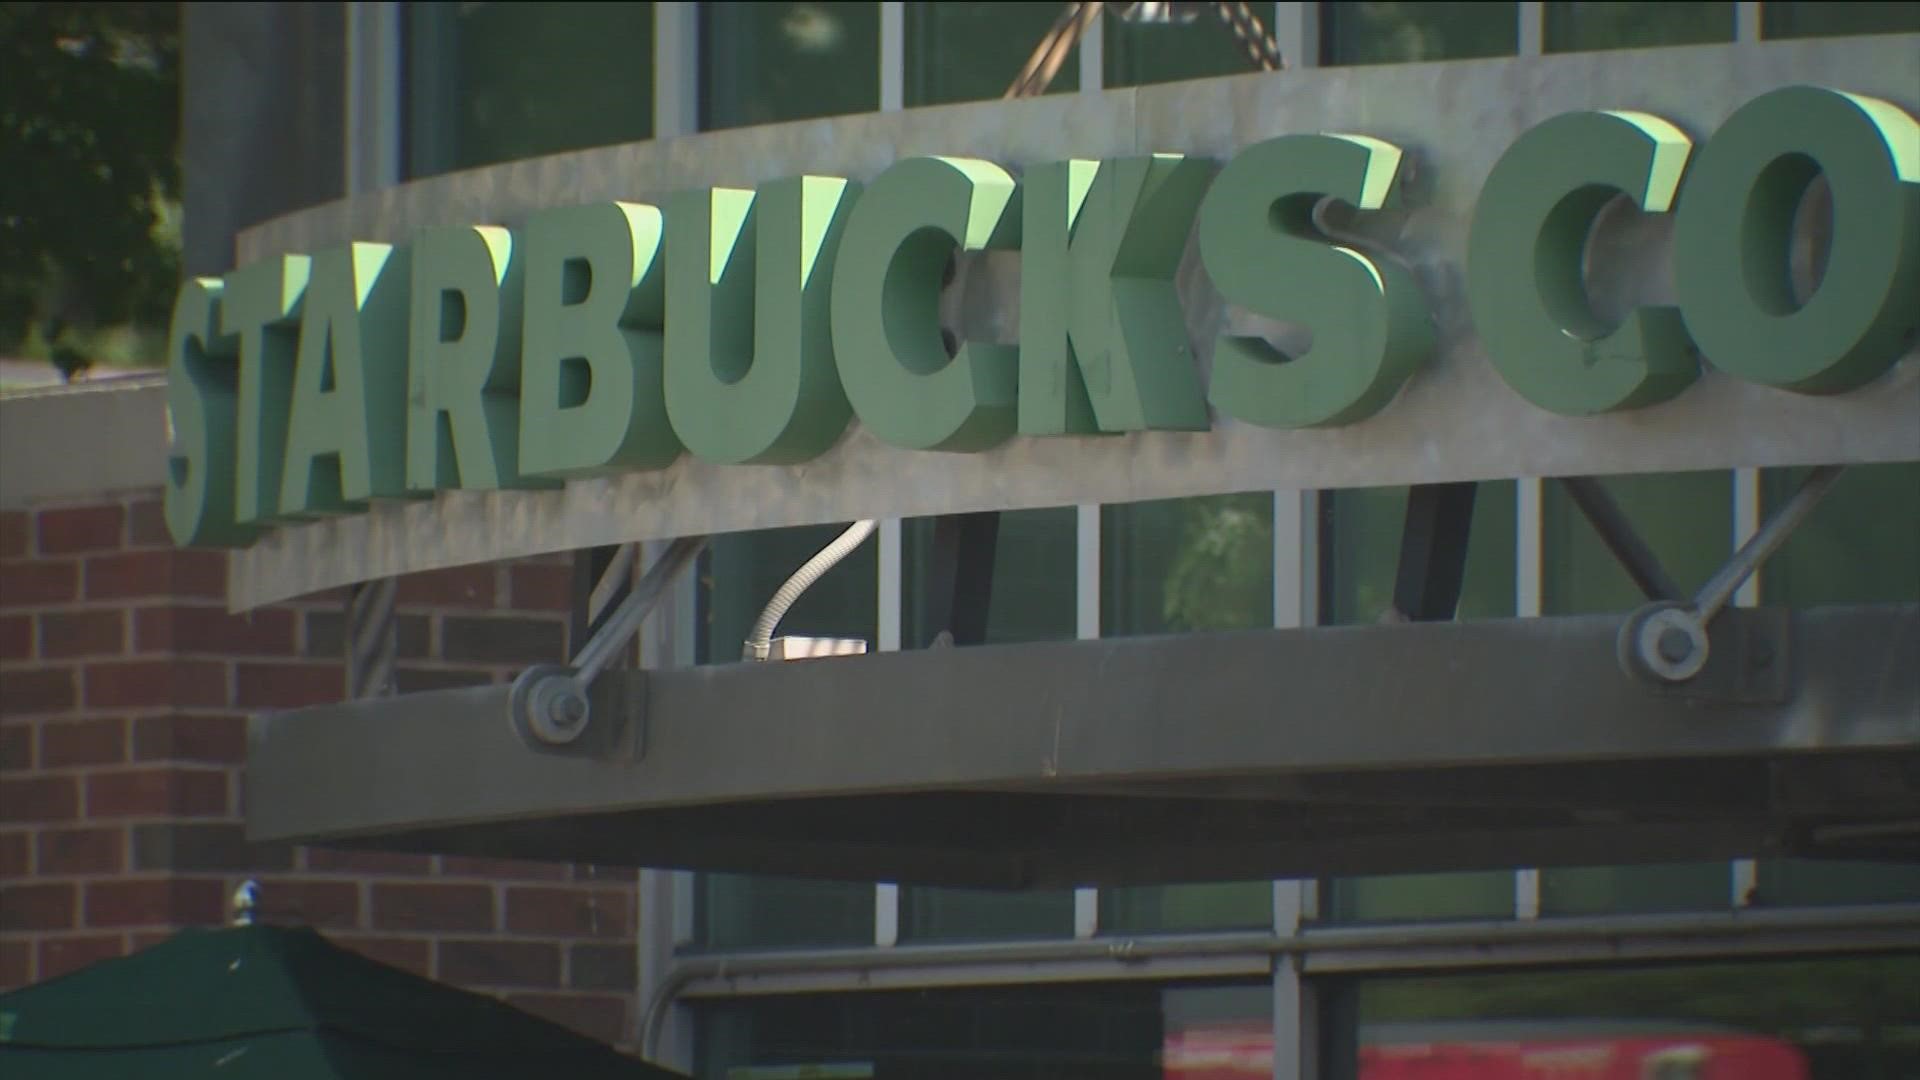 Friday's vote also makes the Starbucks at 24th and Nueces the second location in the state to officially form a union.